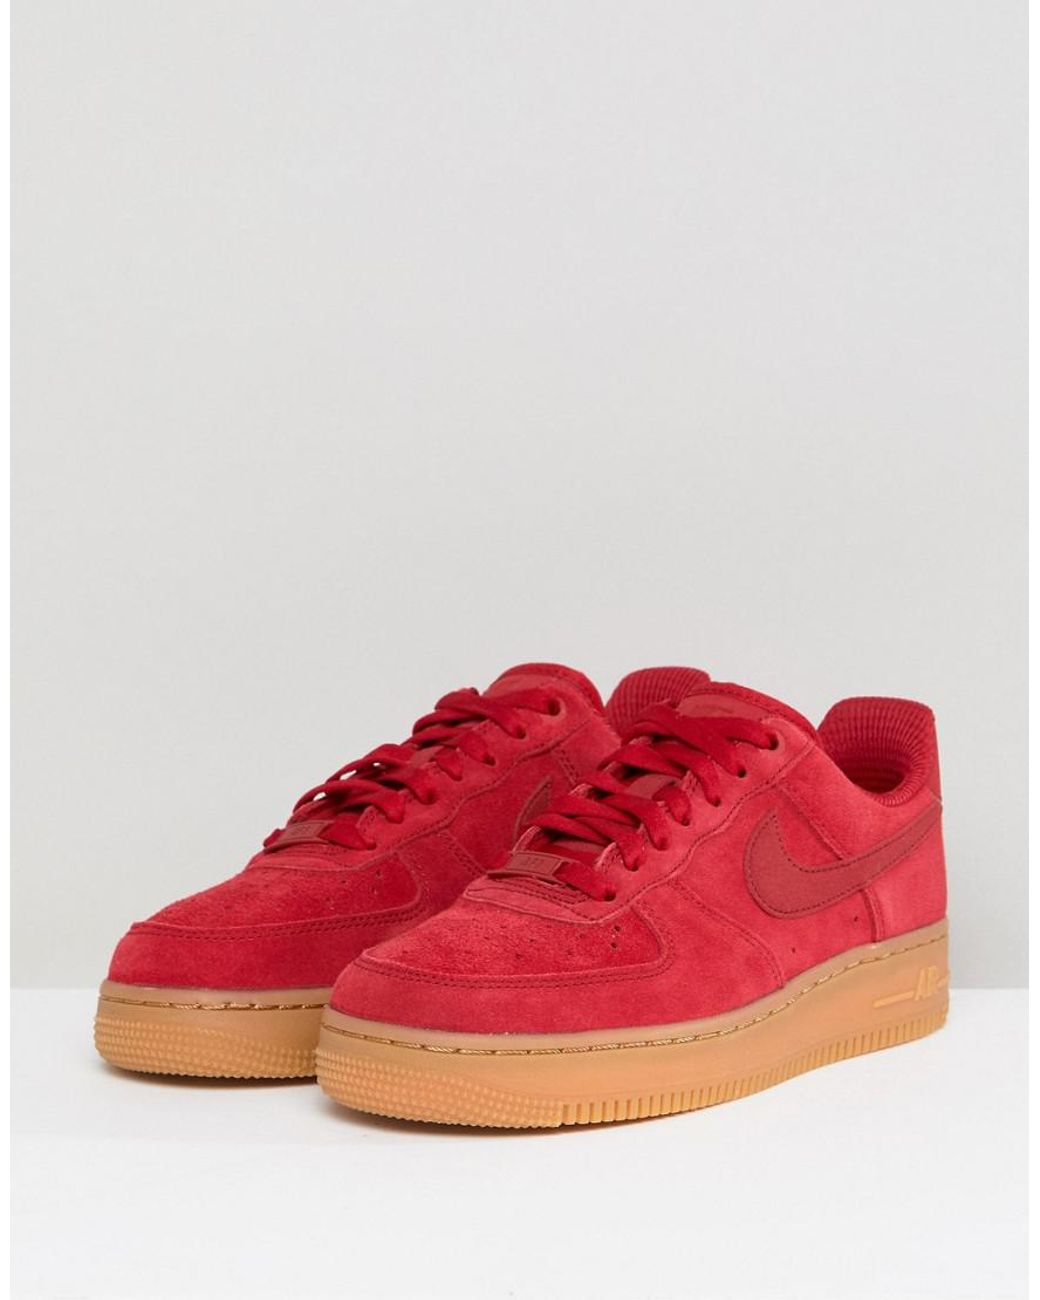 Nike Air Force 1 Red Suede Trainers With Sole |